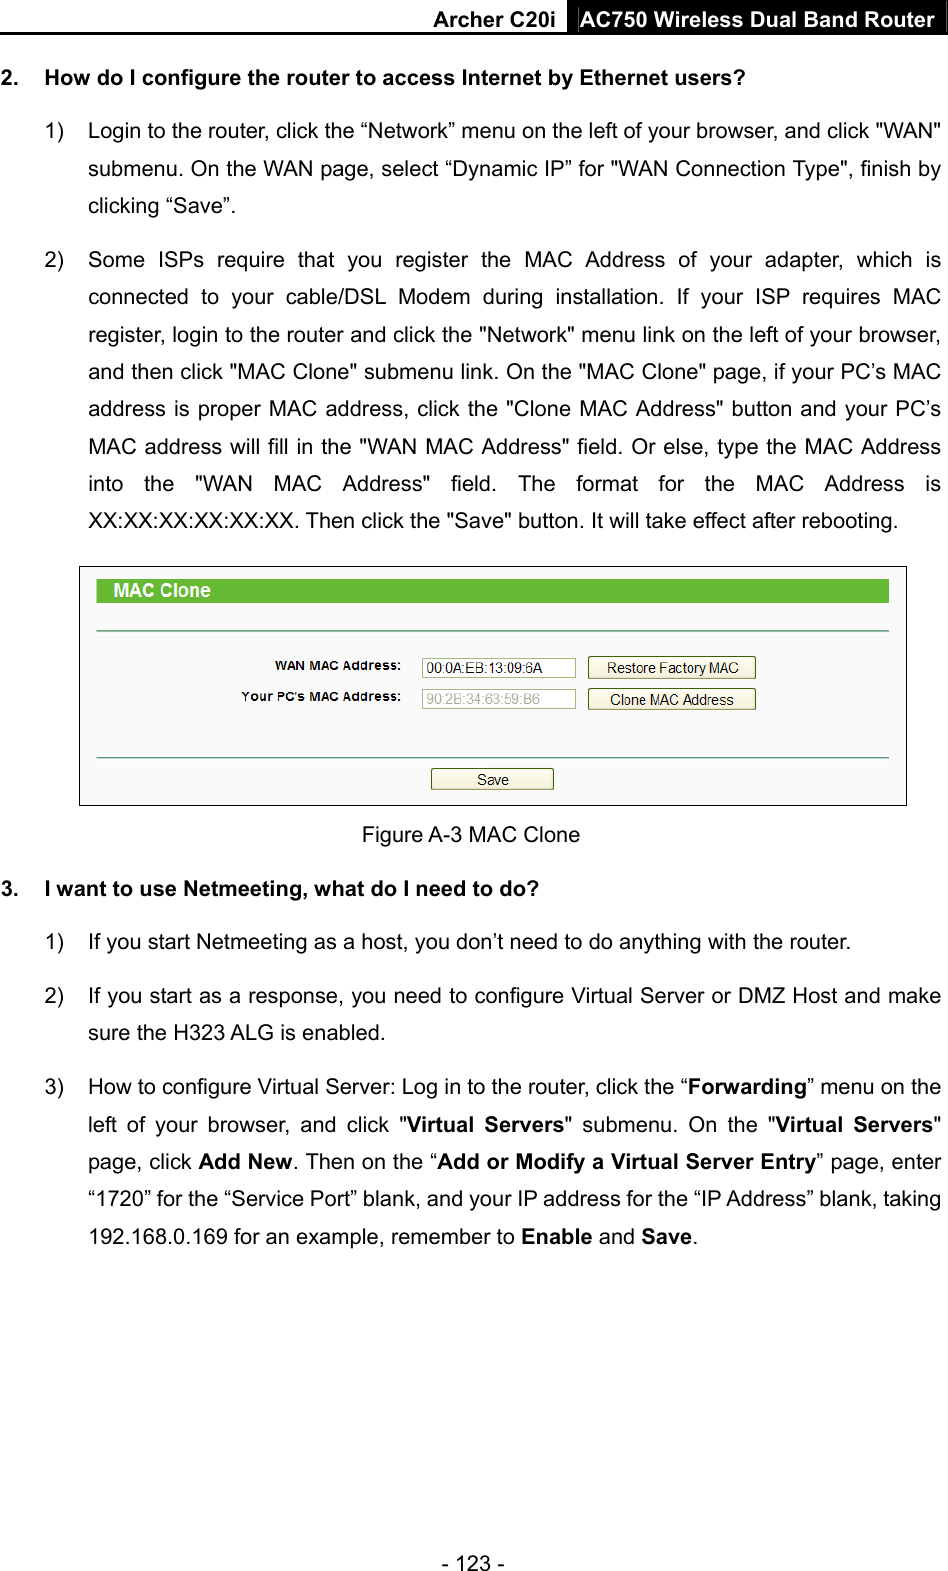 Archer C20i AC750 Wireless Dual Band Router - 123 - 2.  How do I configure the router to access Internet by Ethernet users? 1)  Login to the router, click the “Network” menu on the left of your browser, and click &quot;WAN&quot; submenu. On the WAN page, select “Dynamic IP” for &quot;WAN Connection Type&quot;, finish by clicking “Save”. 2)  Some ISPs require that you register the MAC Address of your adapter, which is connected to your cable/DSL Modem during installation. If your ISP requires MAC register, login to the router and click the &quot;Network&quot; menu link on the left of your browser, and then click &quot;MAC Clone&quot; submenu link. On the &quot;MAC Clone&quot; page, if your PC’s MAC address is proper MAC address, click the &quot;Clone MAC Address&quot; button and your PC’s MAC address will fill in the &quot;WAN MAC Address&quot; field. Or else, type the MAC Address into the &quot;WAN MAC Address&quot; field. The format for the MAC Address is XX:XX:XX:XX:XX:XX. Then click the &quot;Save&quot; button. It will take effect after rebooting.  Figure A-3 MAC Clone 3.  I want to use Netmeeting, what do I need to do? 1)  If you start Netmeeting as a host, you don’t need to do anything with the router. 2)  If you start as a response, you need to configure Virtual Server or DMZ Host and make sure the H323 ALG is enabled. 3)  How to configure Virtual Server: Log in to the router, click the “Forwarding” menu on the left of your browser, and click &quot;Virtual Servers&quot; submenu. On the &quot;Virtual Servers&quot; page, click Add New. Then on the “Add or Modify a Virtual Server Entry” page, enter “1720” for the “Service Port” blank, and your IP address for the “IP Address” blank, taking 192.168.0.169 for an example, remember to Enable and Save.  